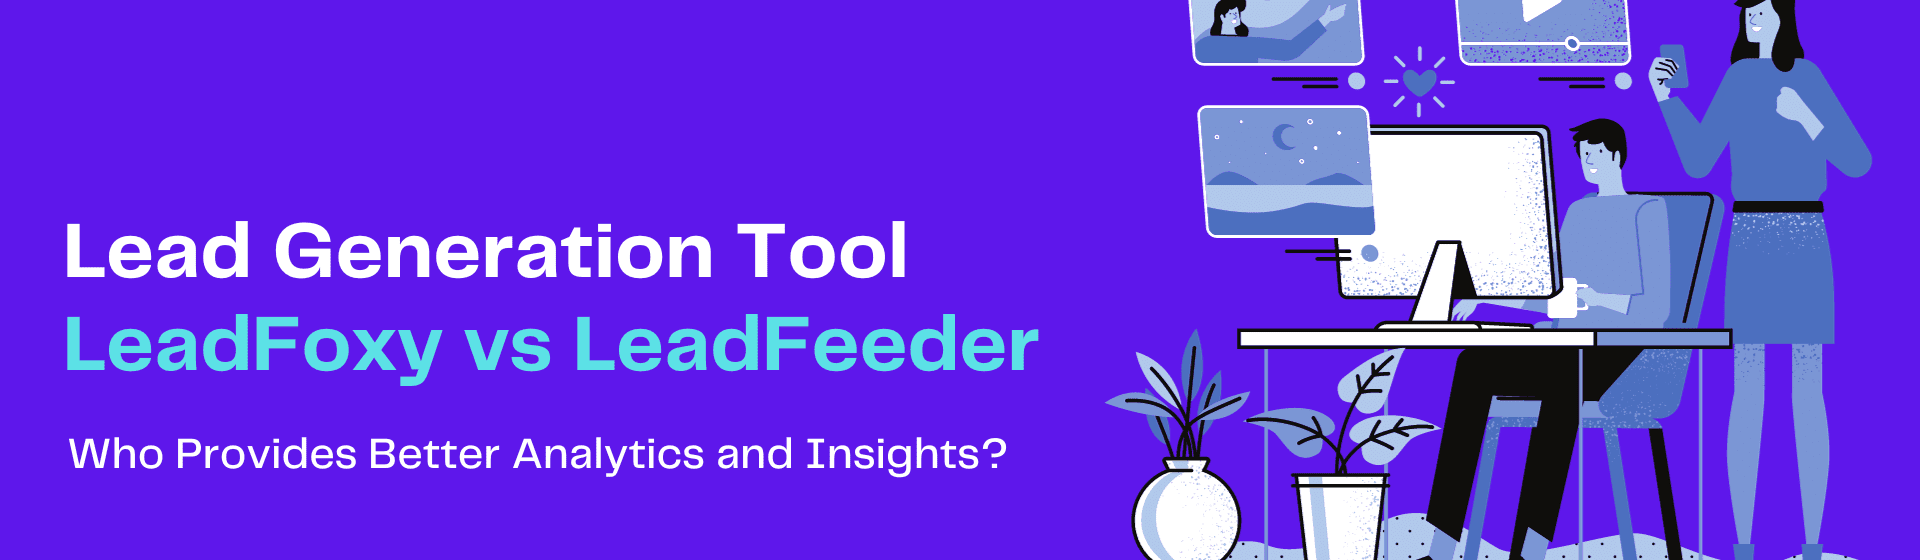 Lead Generation Tool LeadFoxy vs LeadFeeder - Who Provides Better Analytics and Insights?